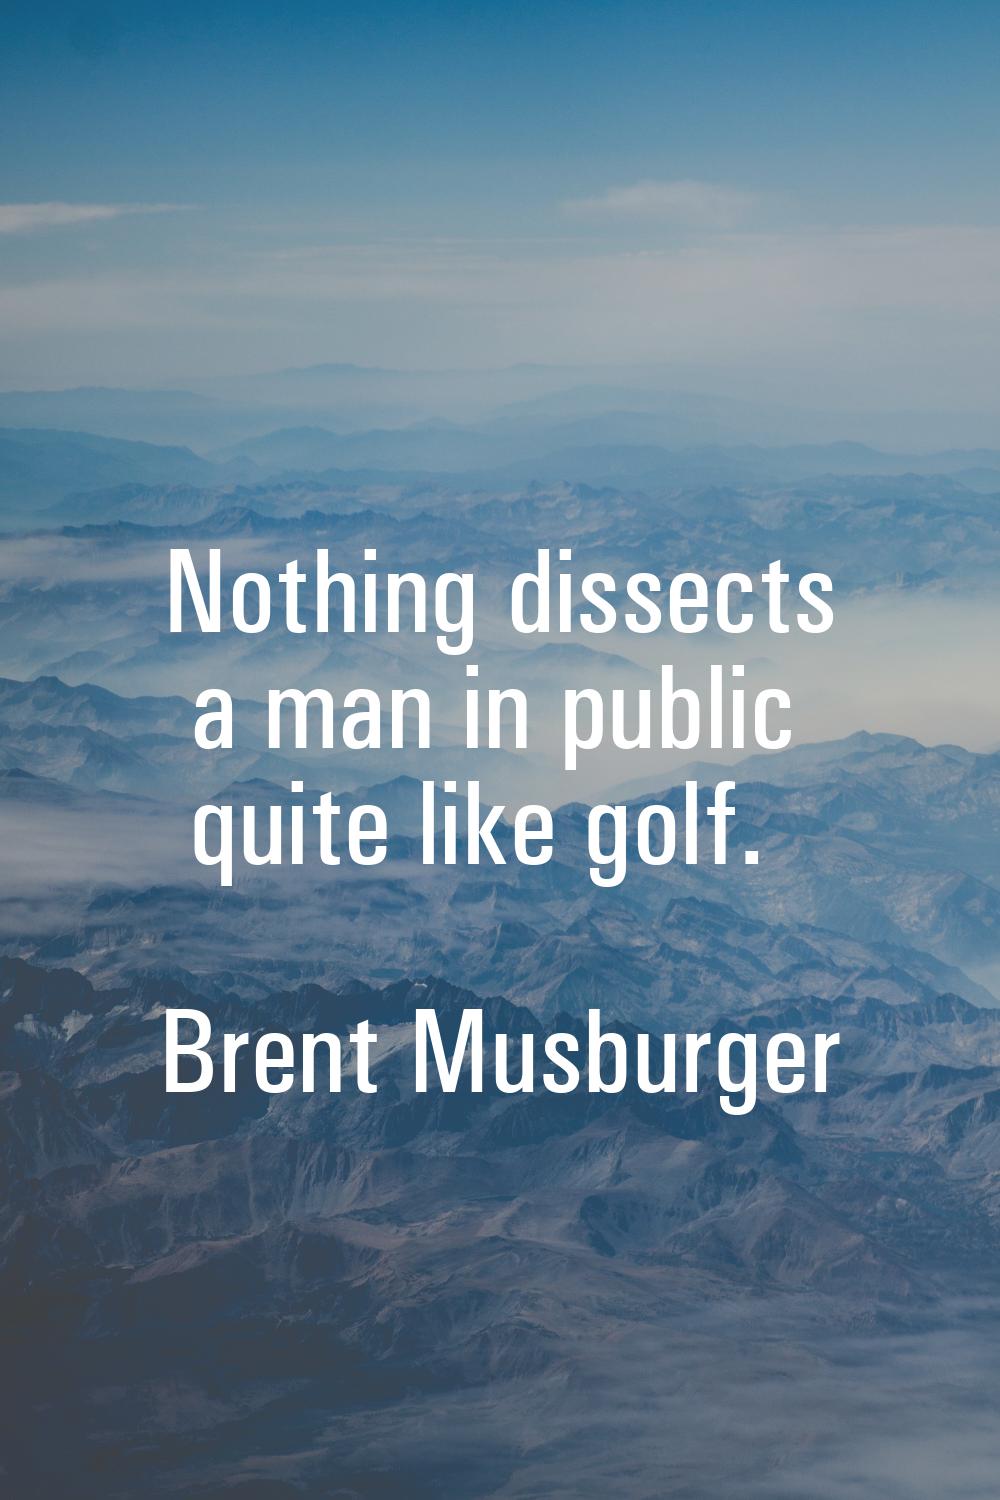 Nothing dissects a man in public quite like golf.